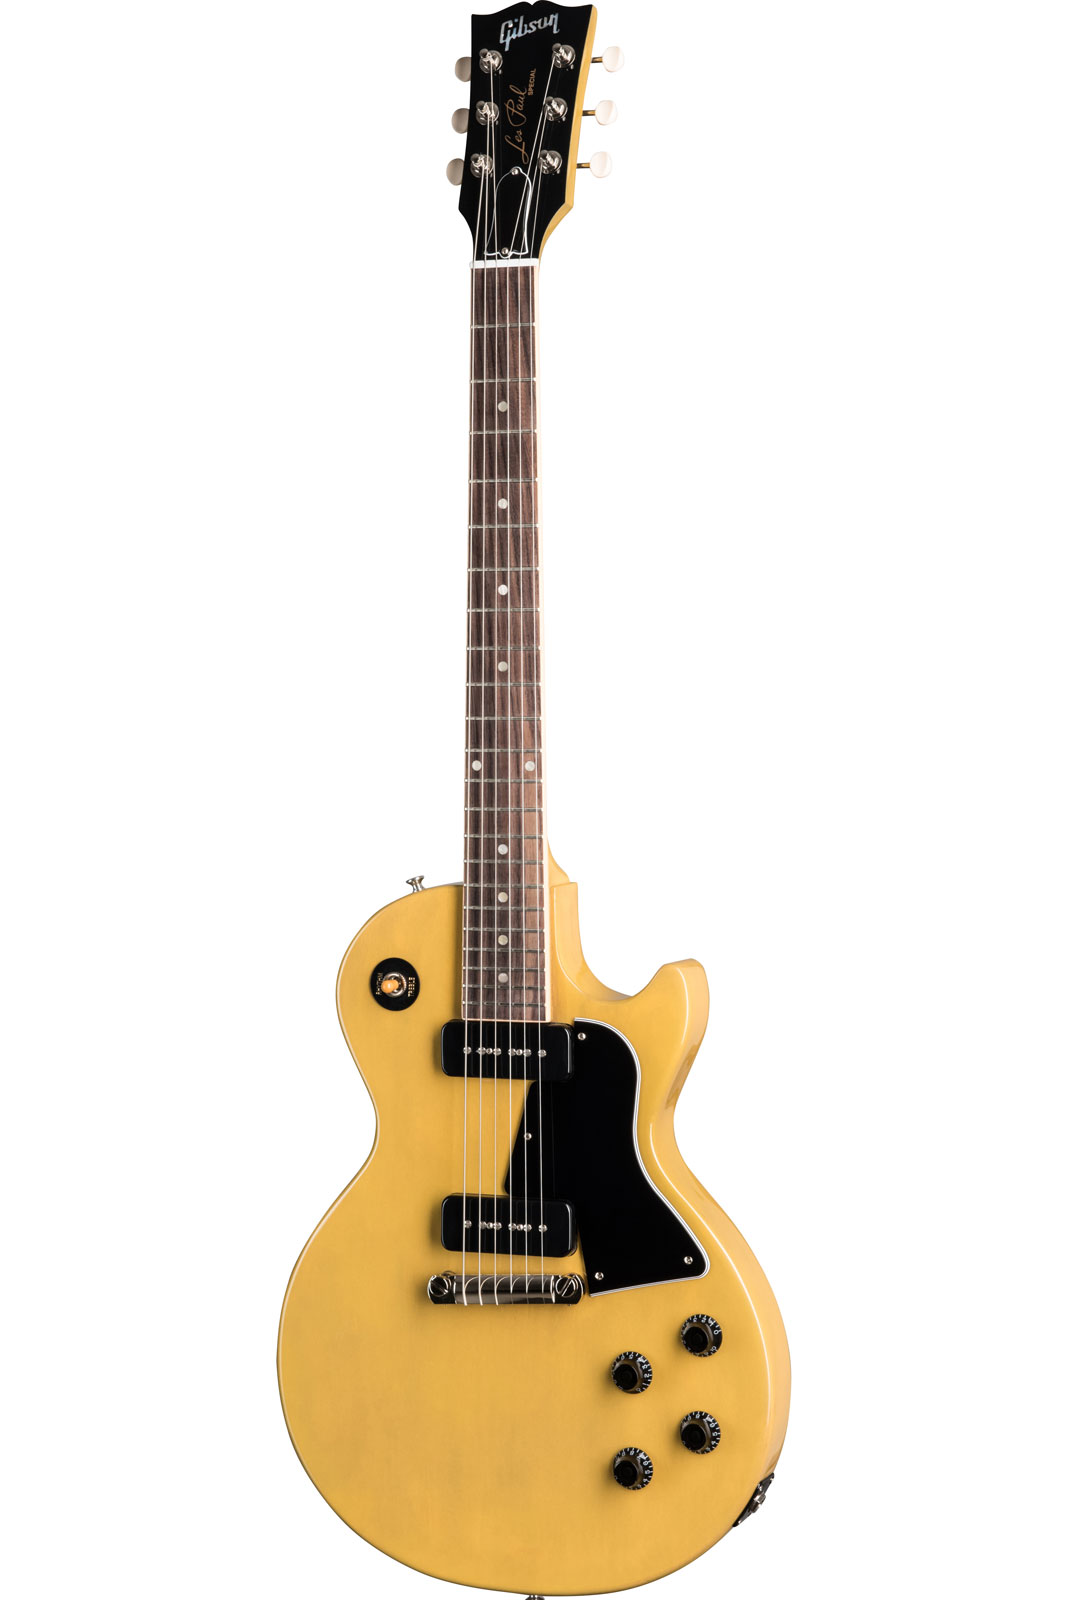 GIBSON USA LES PAUL SPECIAL TV YELLOW OC